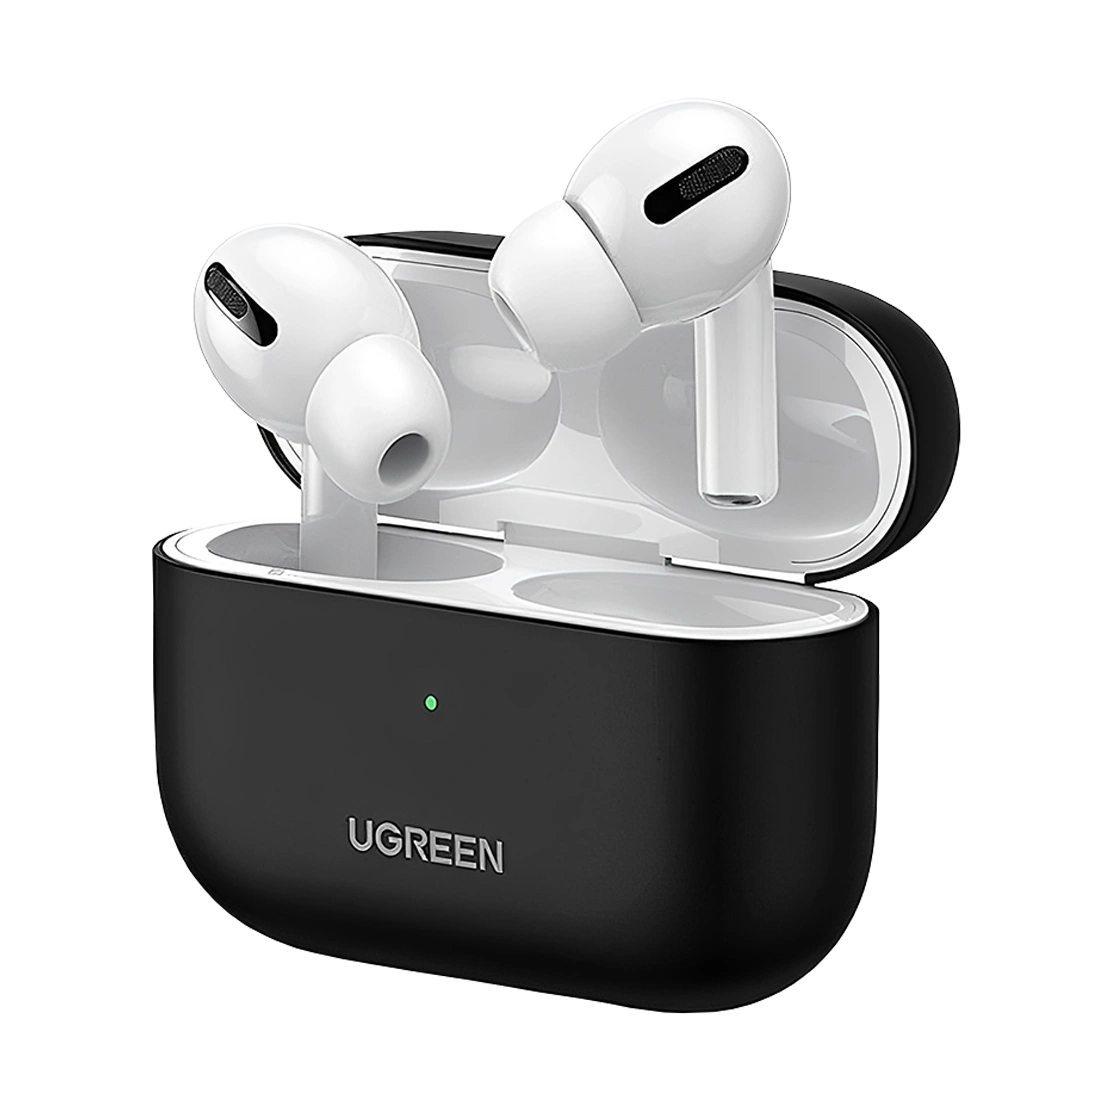 Ugreen Case for Airpods Pro LP324